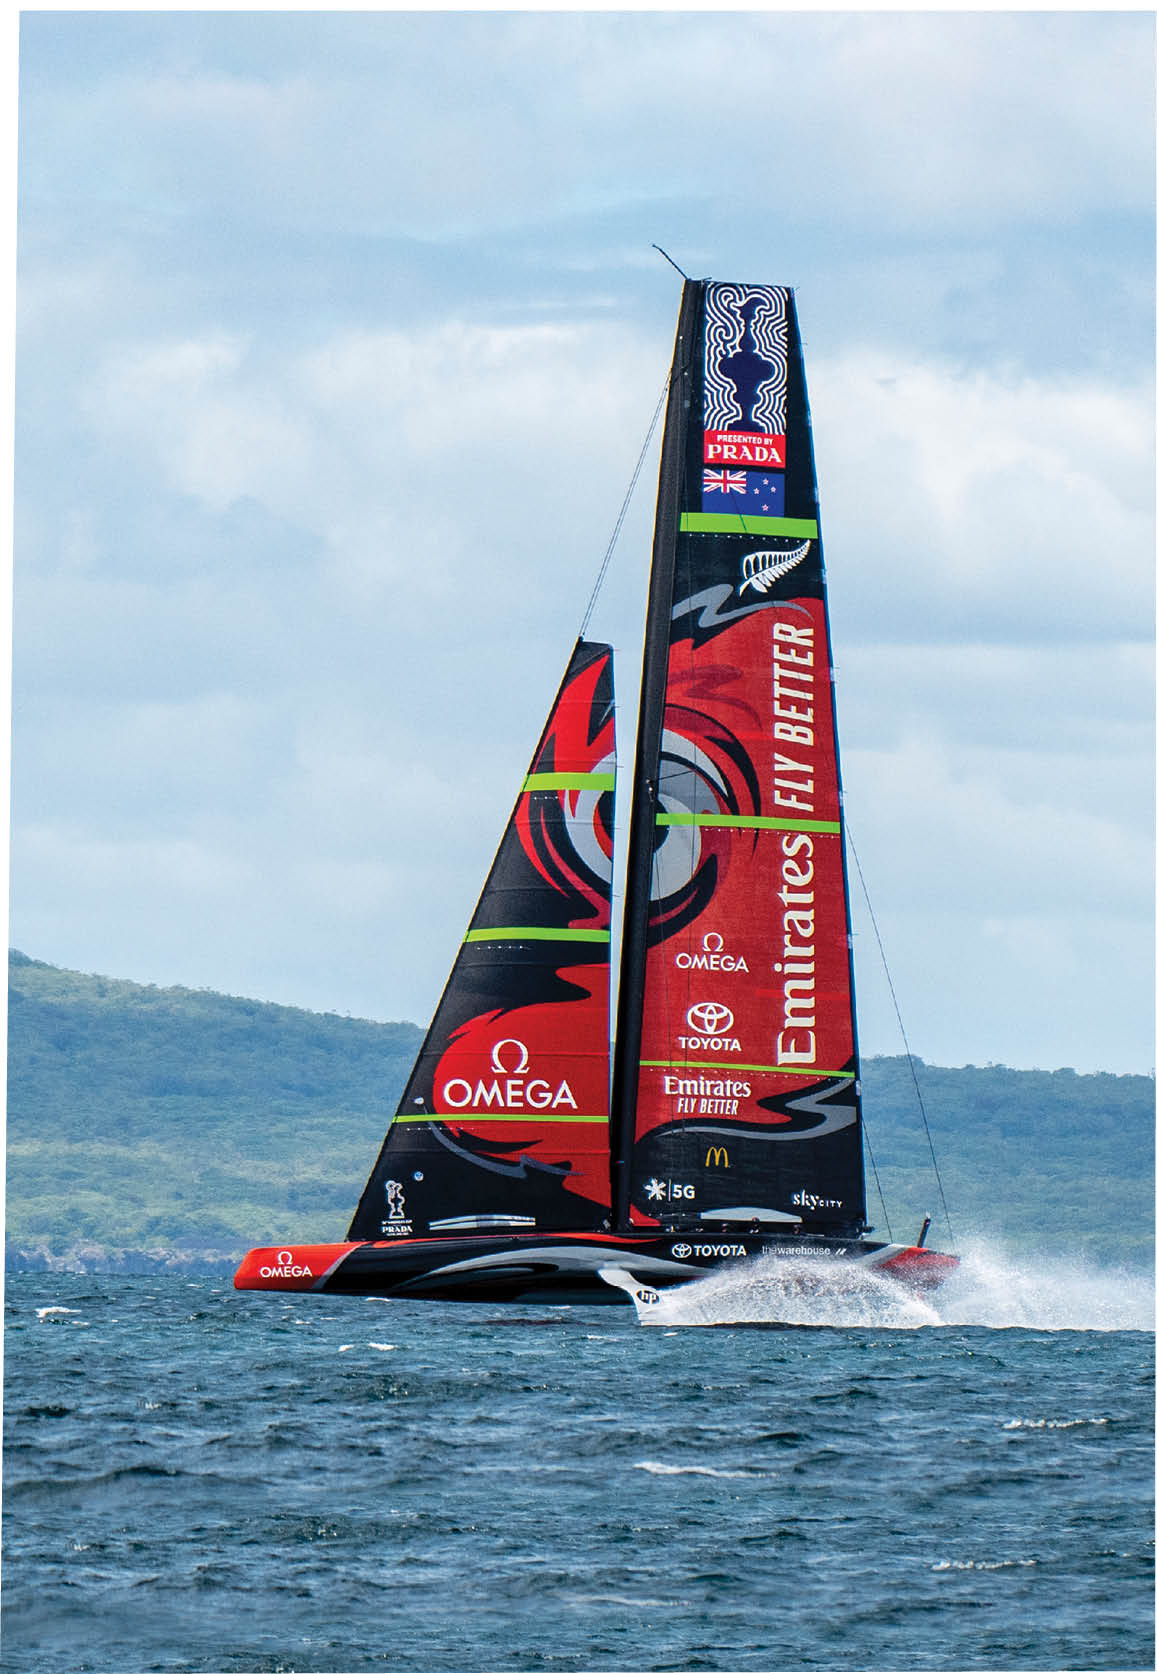 To defend the Cup in 2021, the team is again relying on the combination of Ansys and in-house simulation tools for efficient assessment of large design spaces as it seeks to design a foiling monohull that balances speed and maneuverability.